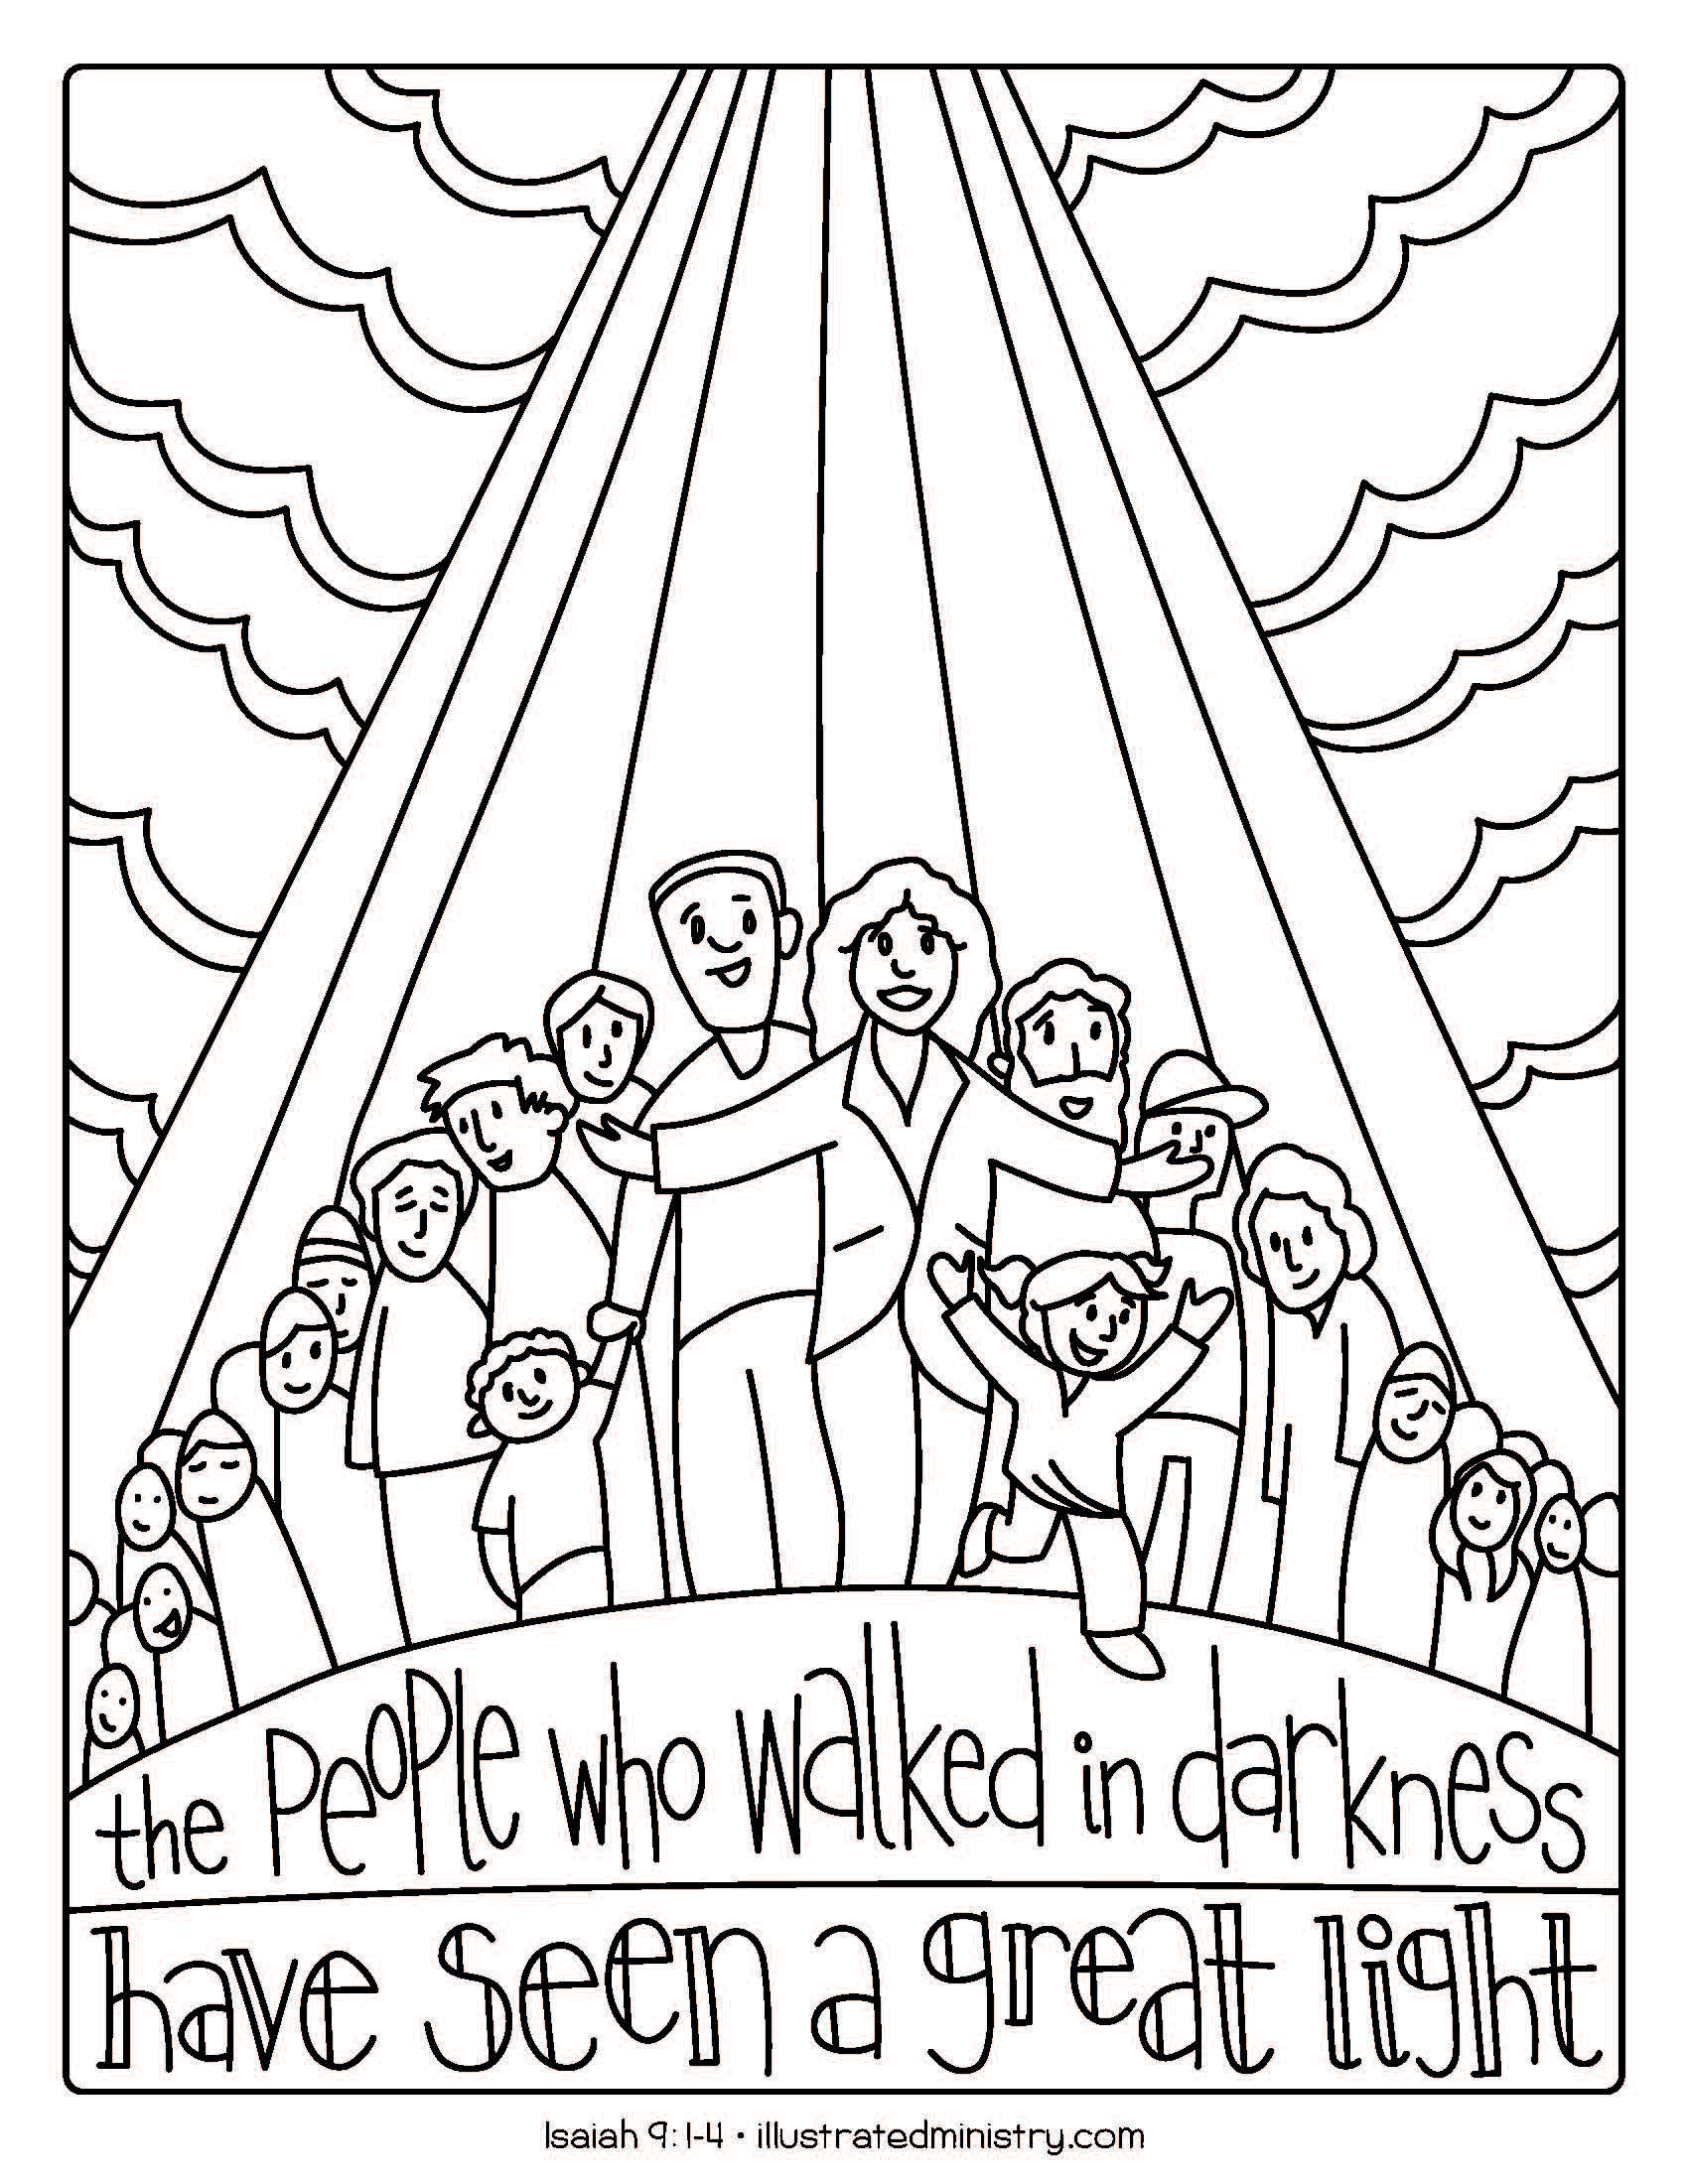 Bible Story Coloring Pages: Winter 27-27